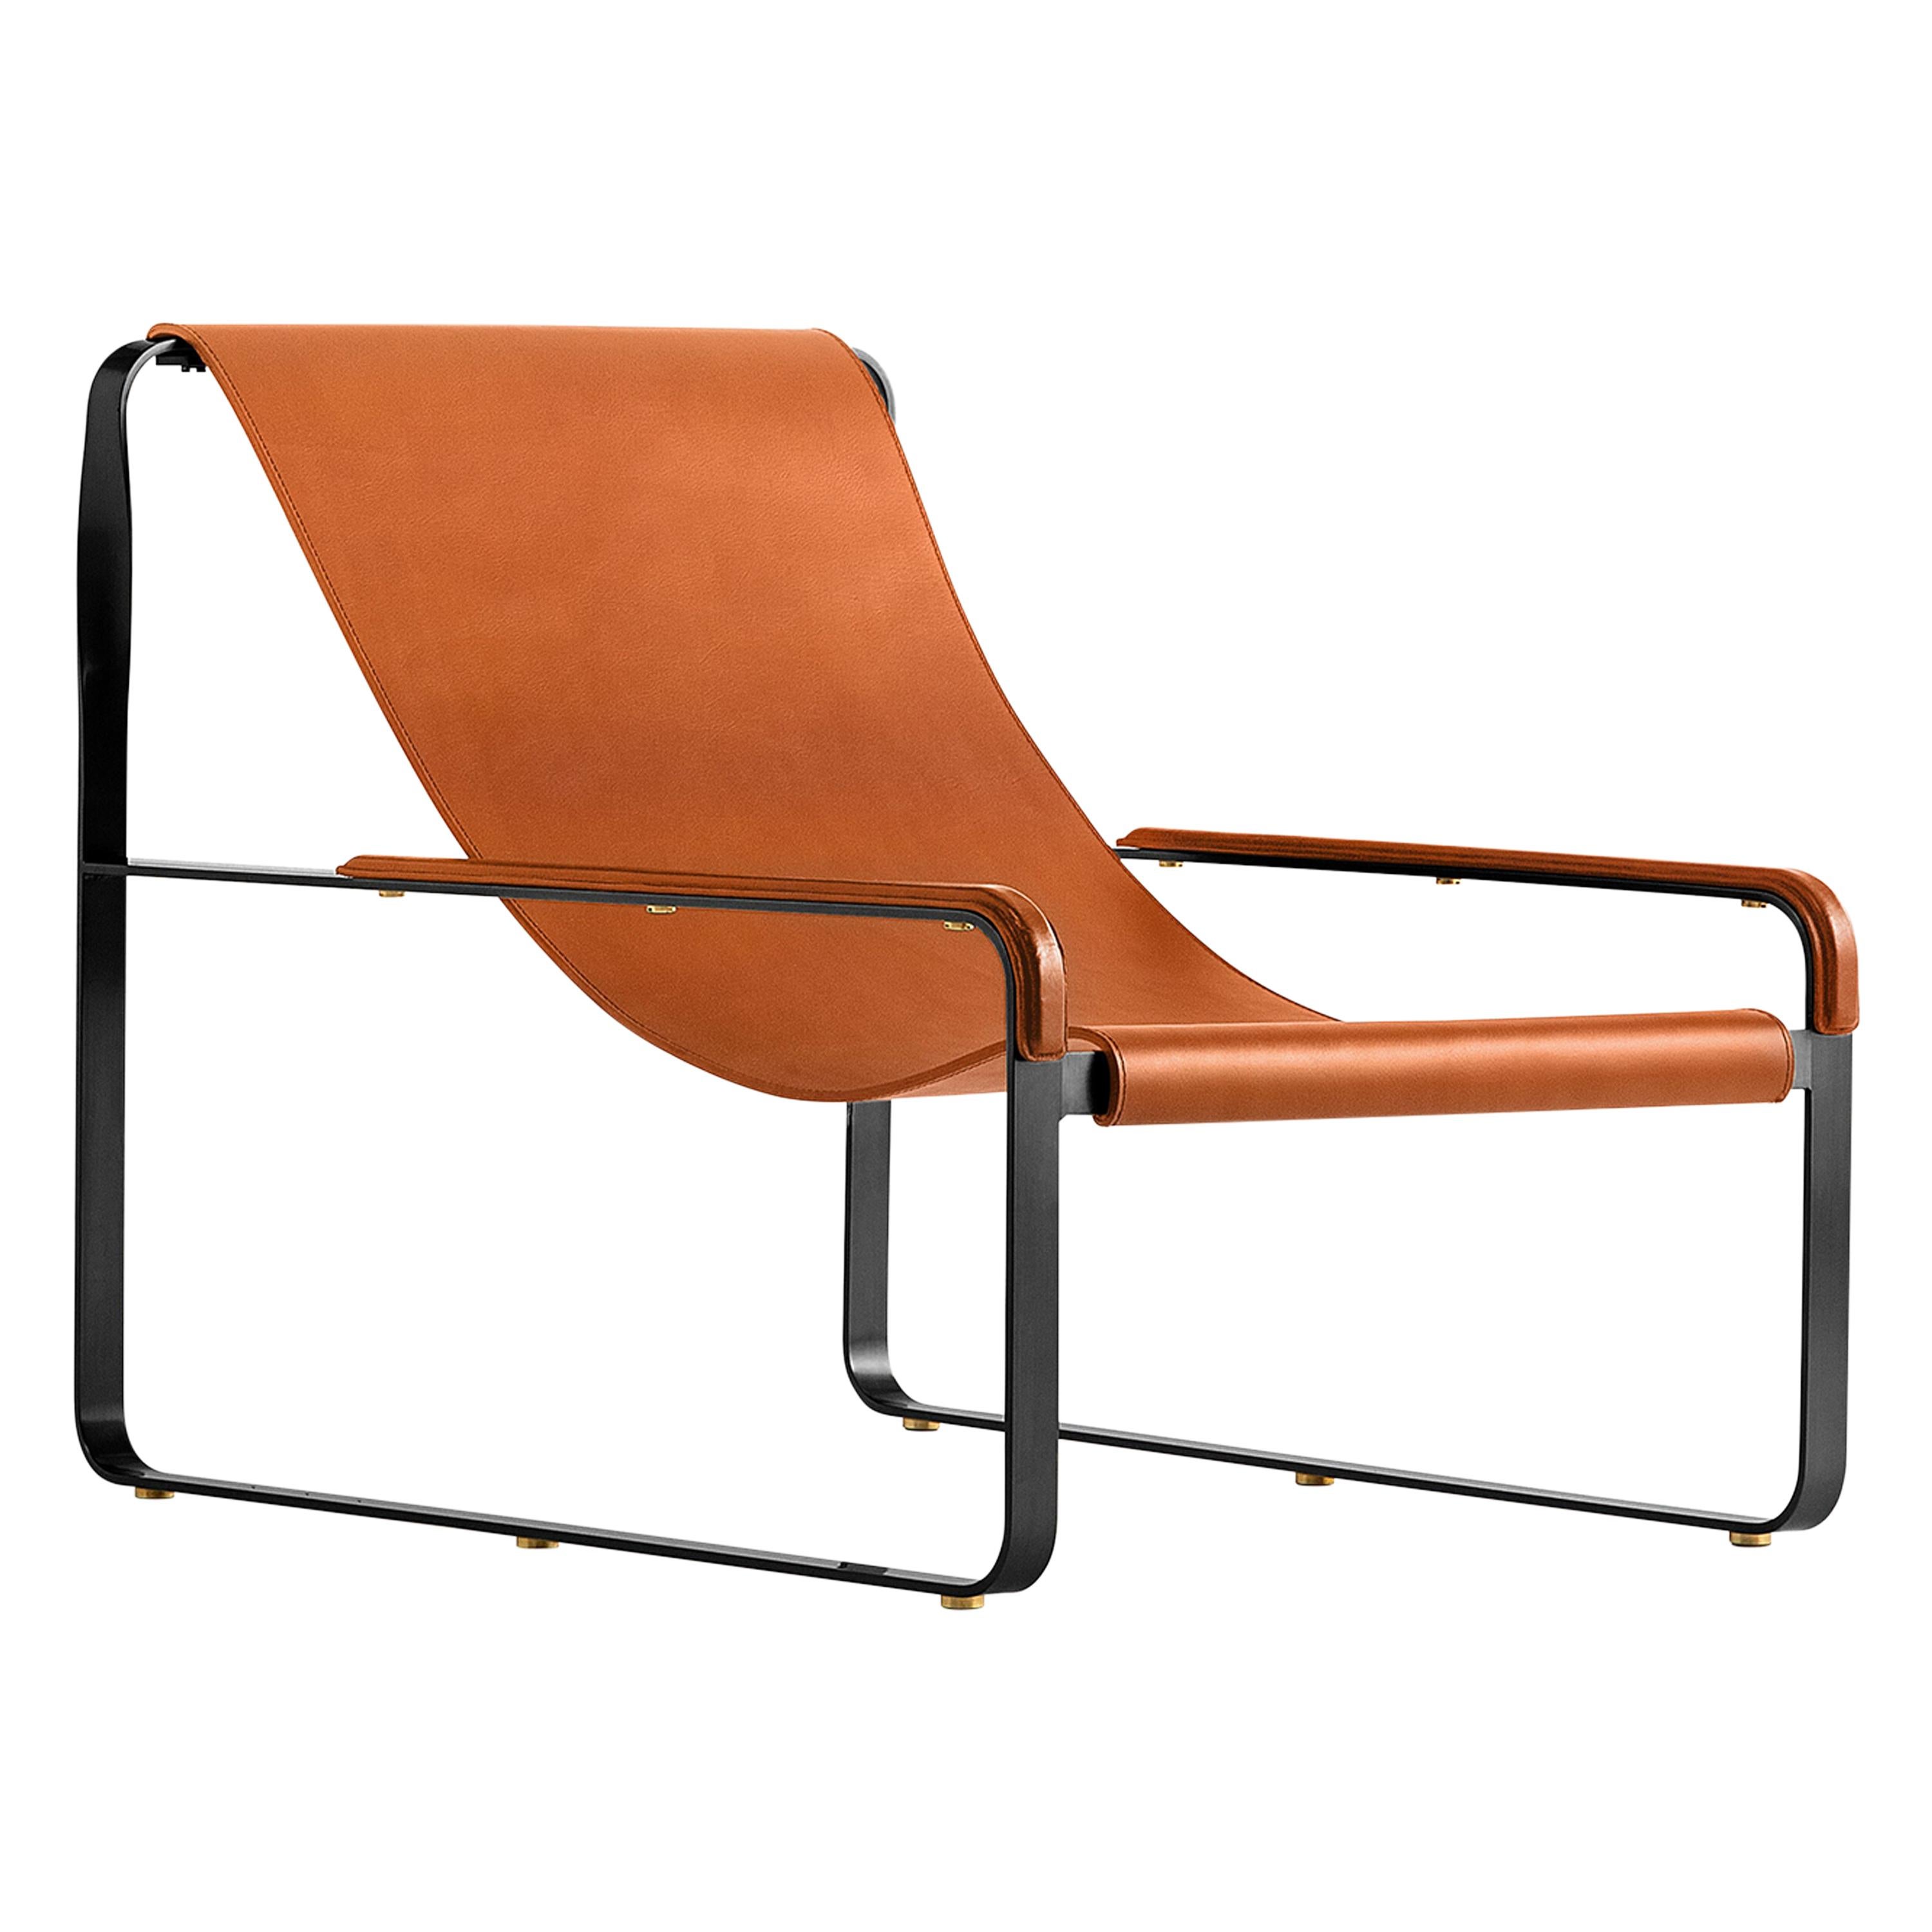 Contemporary Minimal Chaise Lounge Black Steel & Natural Tan Tobacco Leather